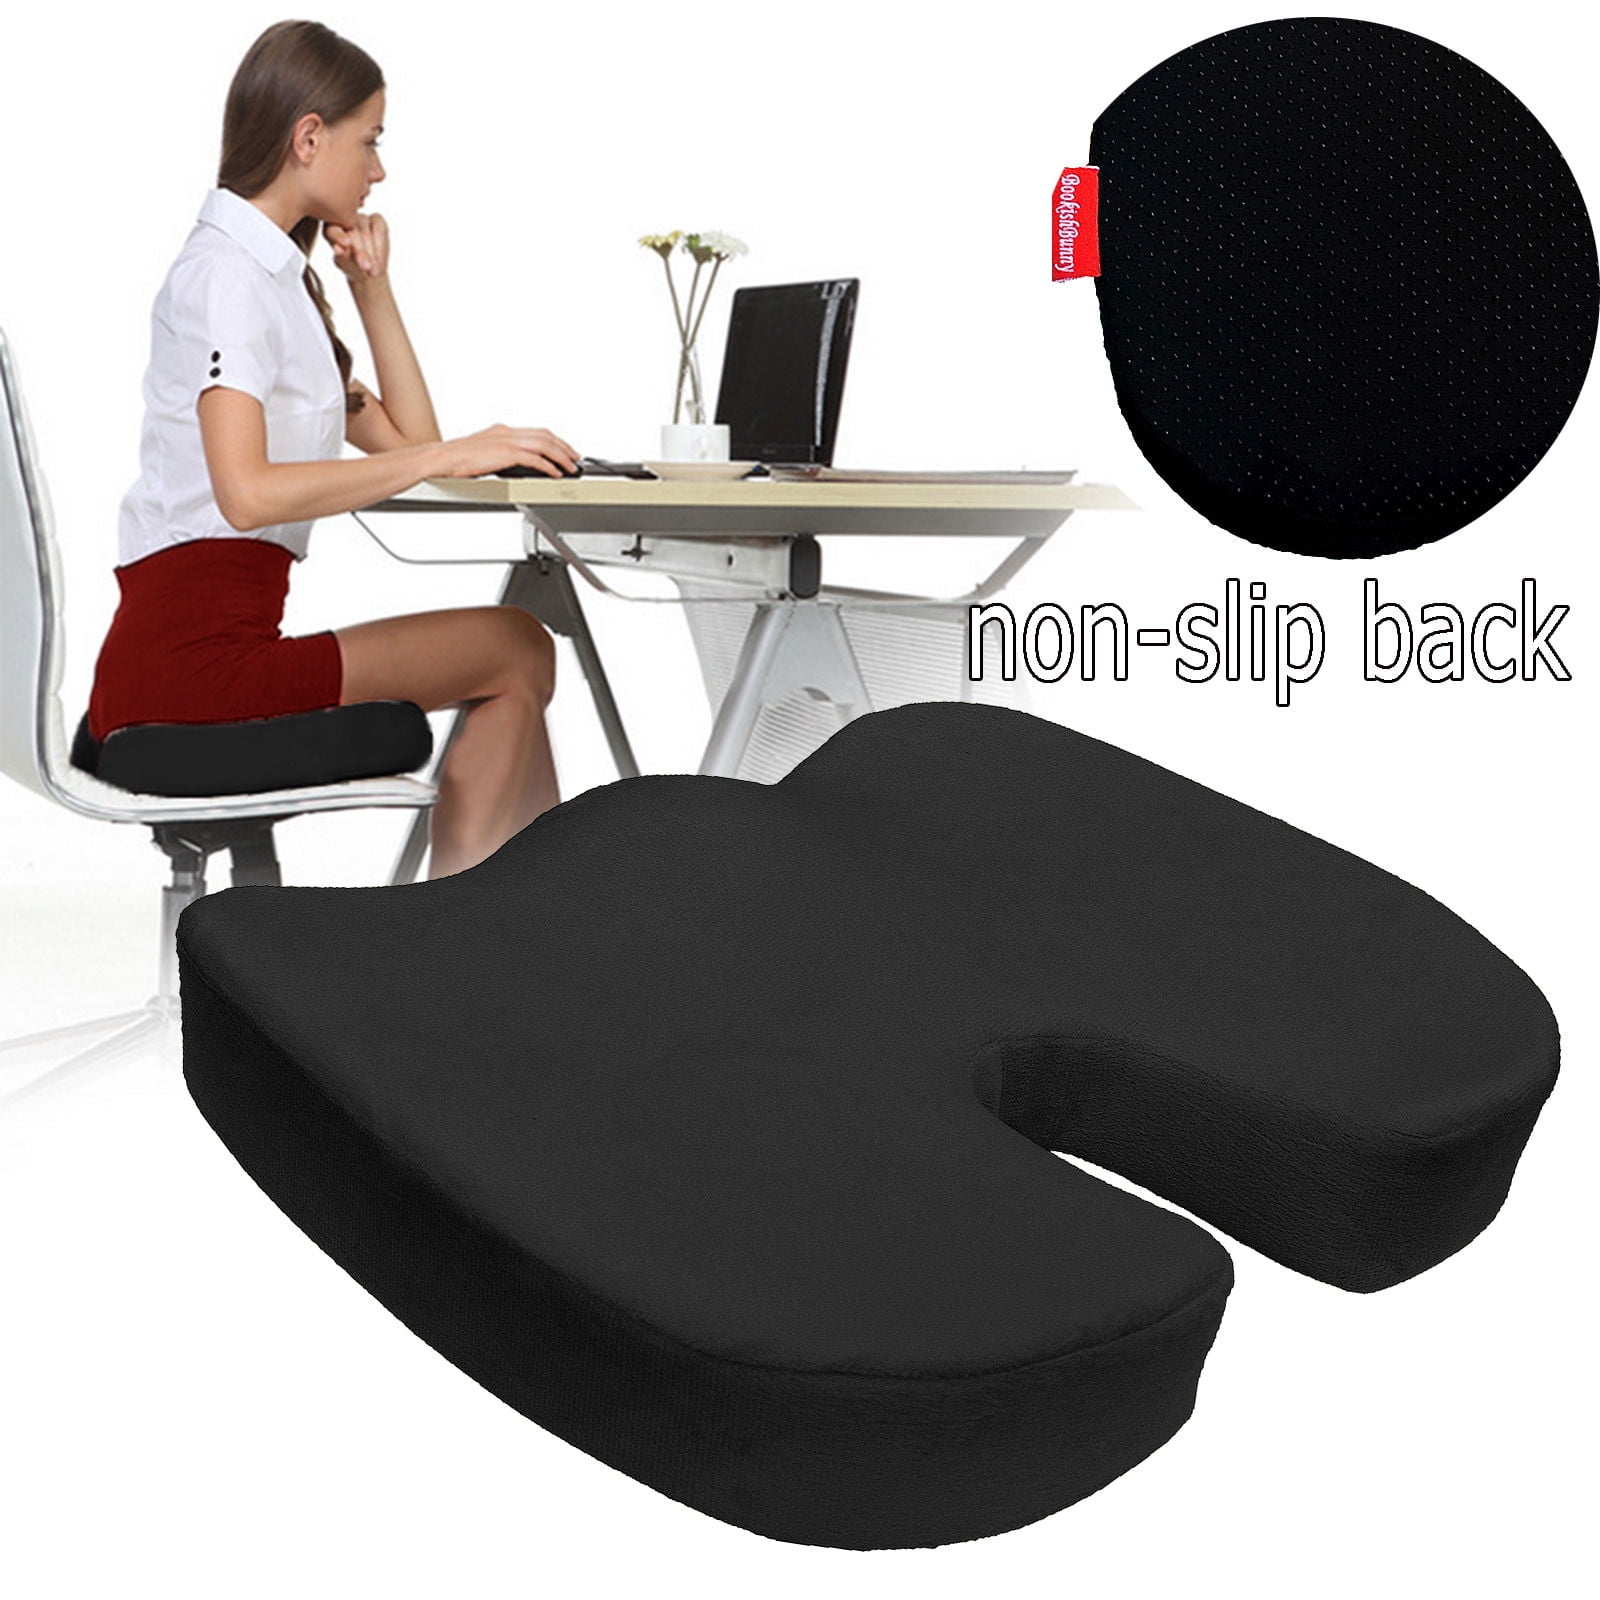 Premium High Resilience Memory Foam Coccyx Seat Cushion Pad Support Pi –  BookishBunny